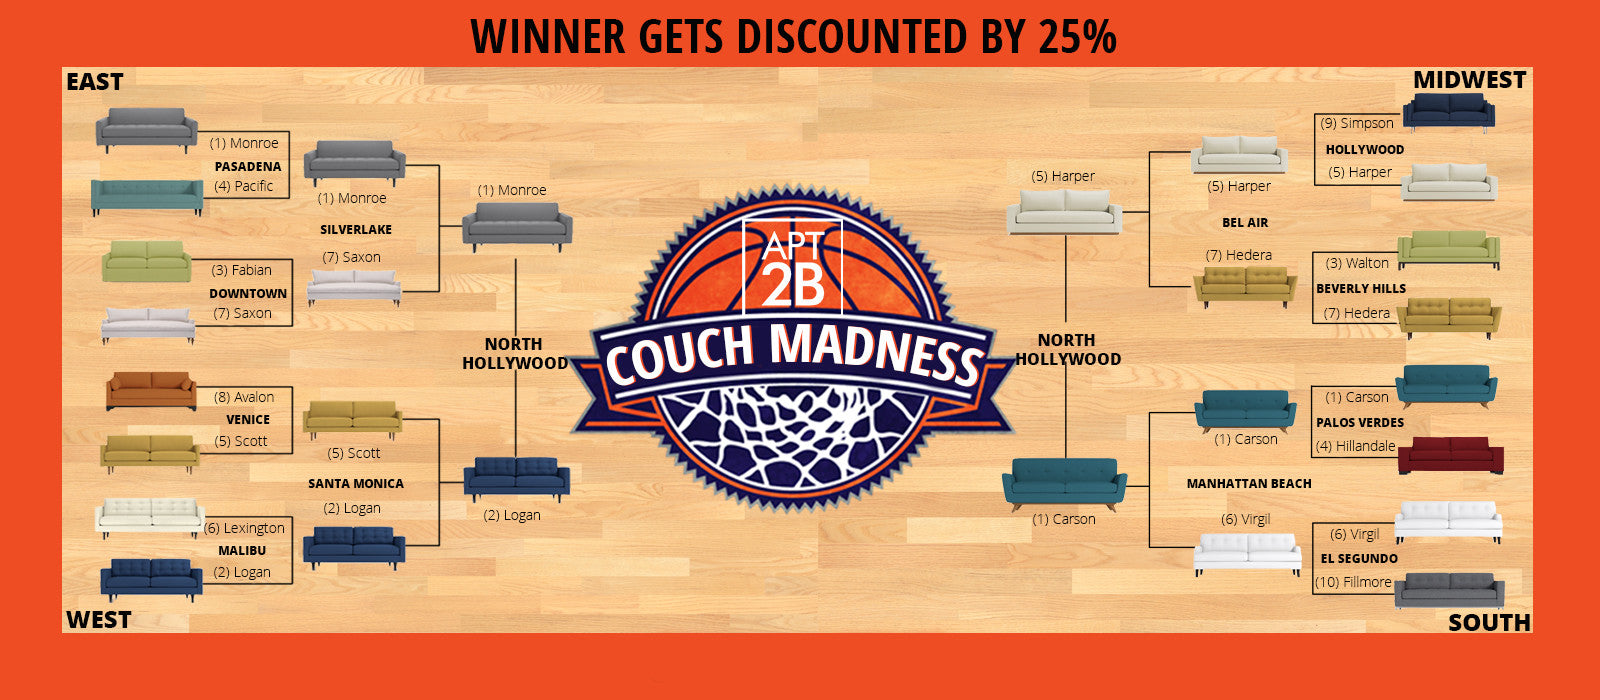 March Madness bracket with sofas instead of teams